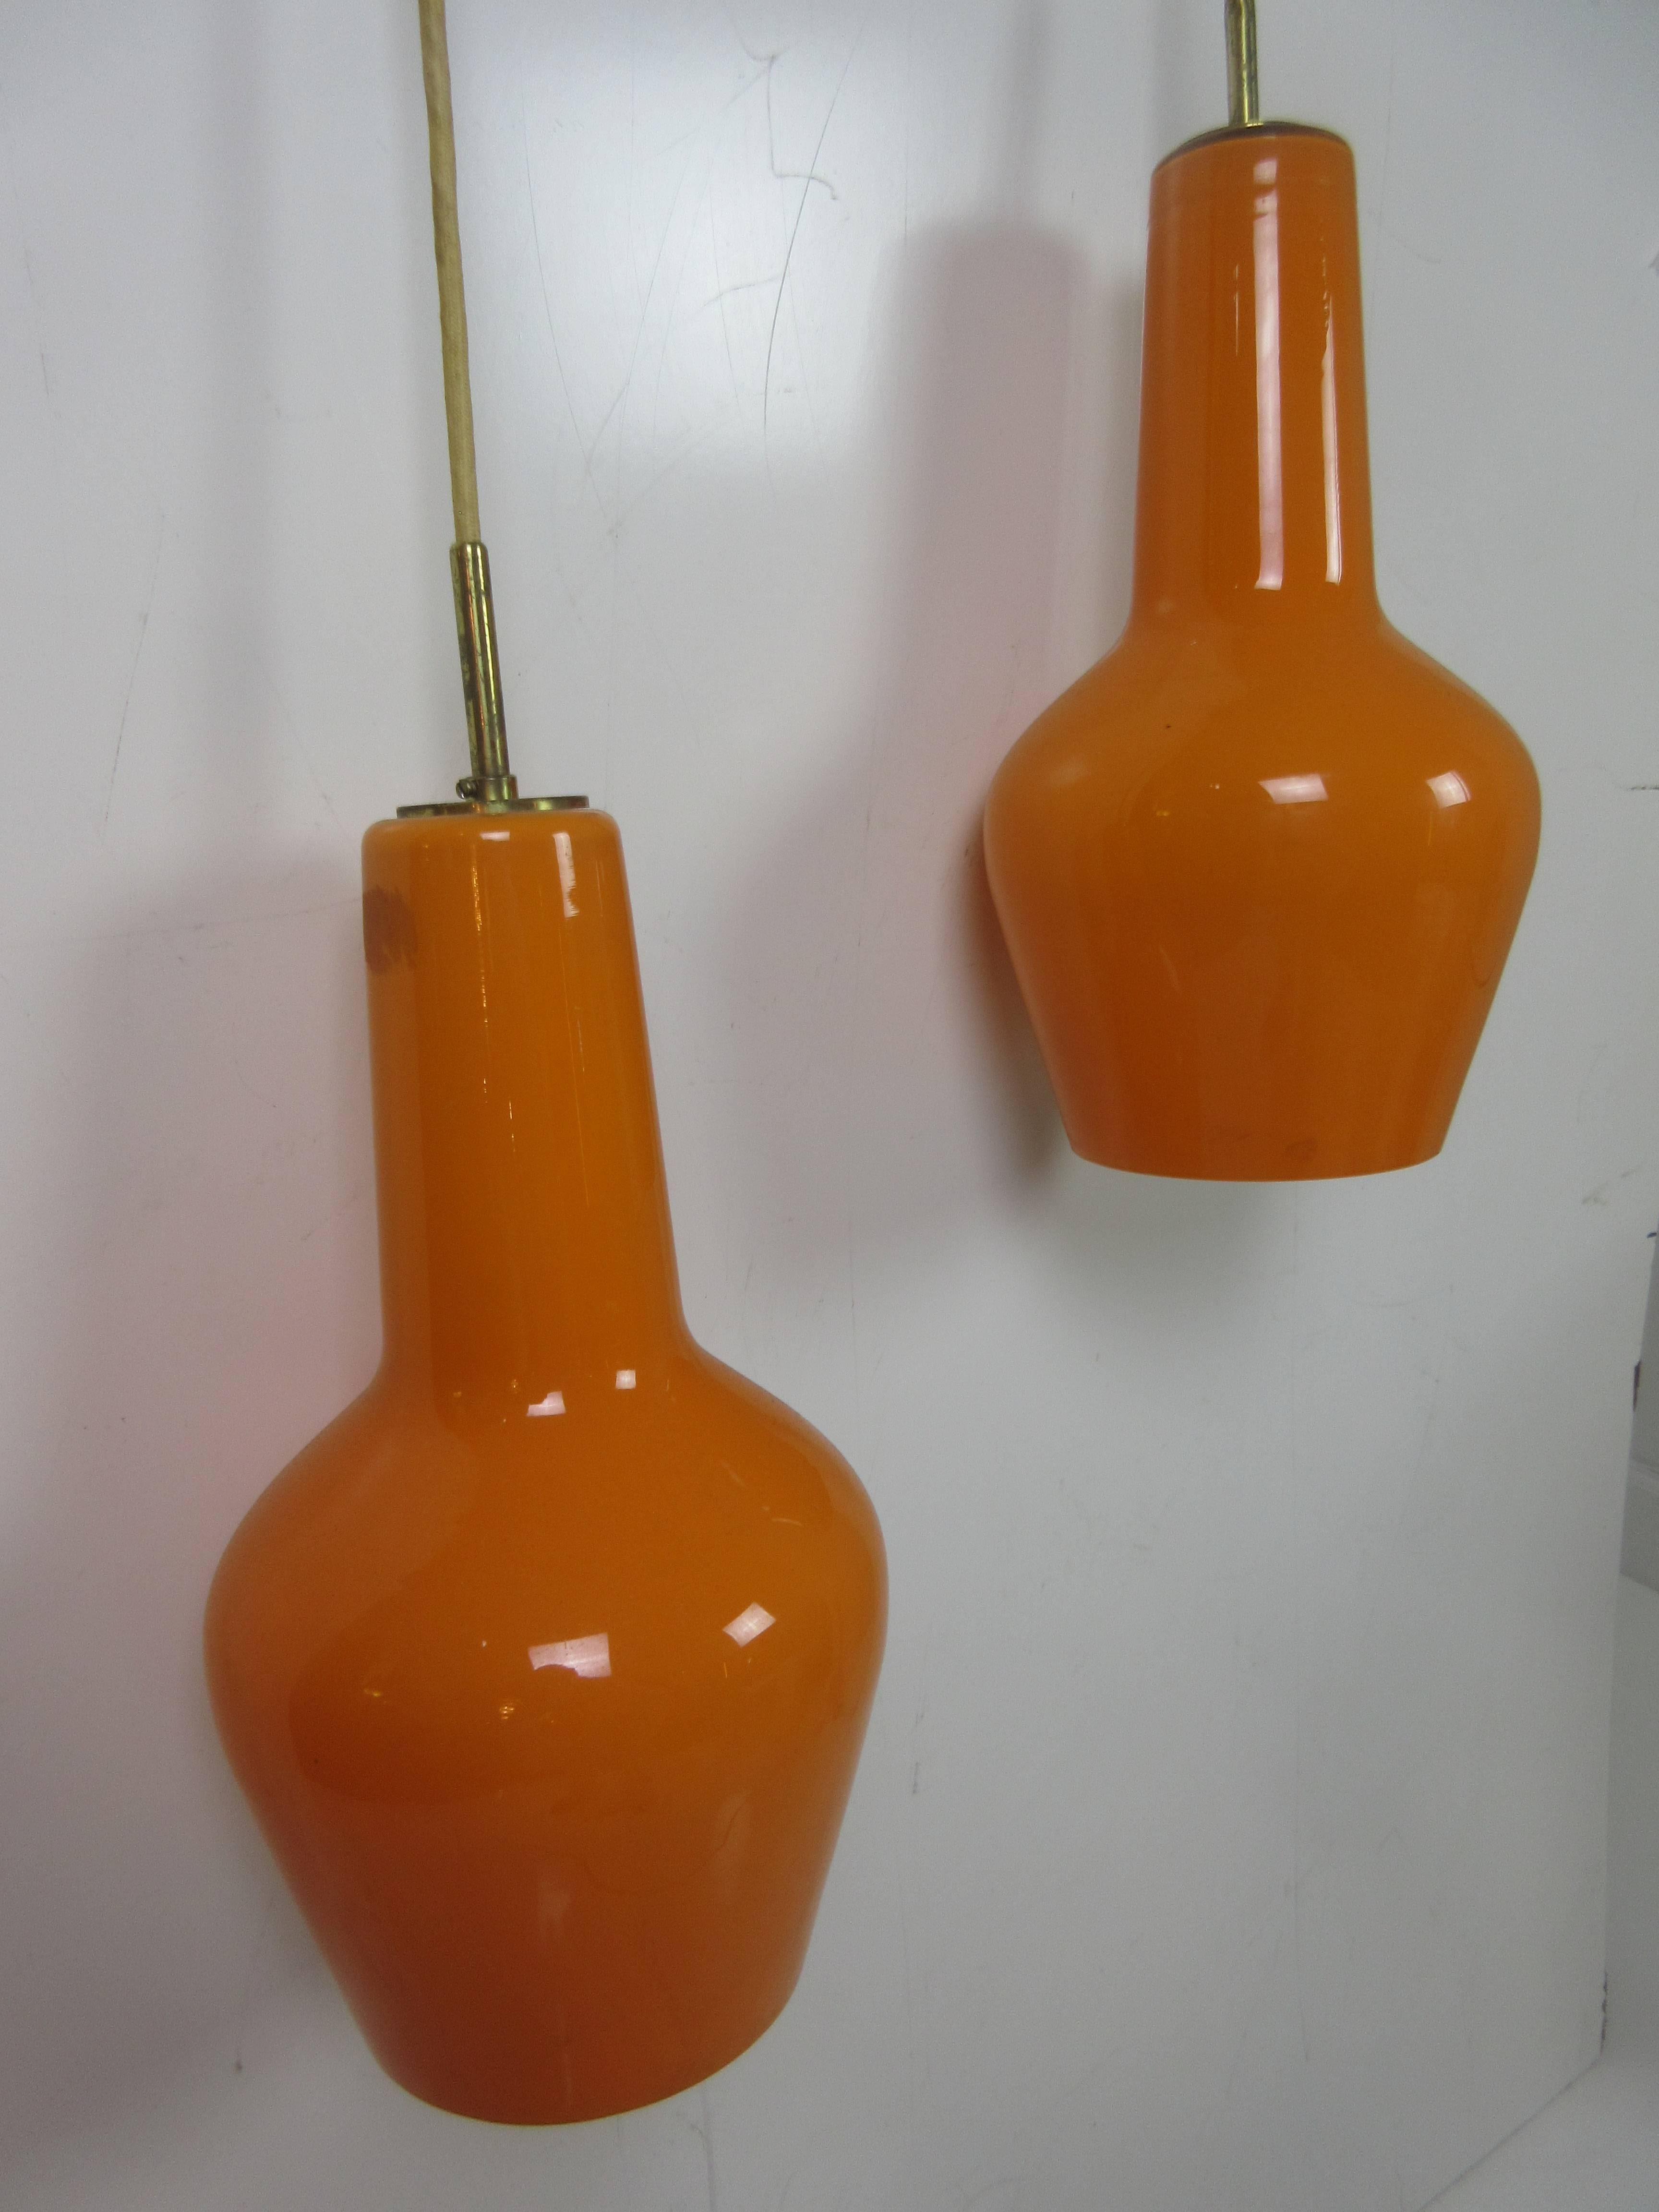 Danish cased orange glass pendant ceiling fixture from the 1950s. Brass fixture suspends and separates the two globes. Original cloth covered wire remains. Length of wire is adjustable for varying globe height (both globes the same position or